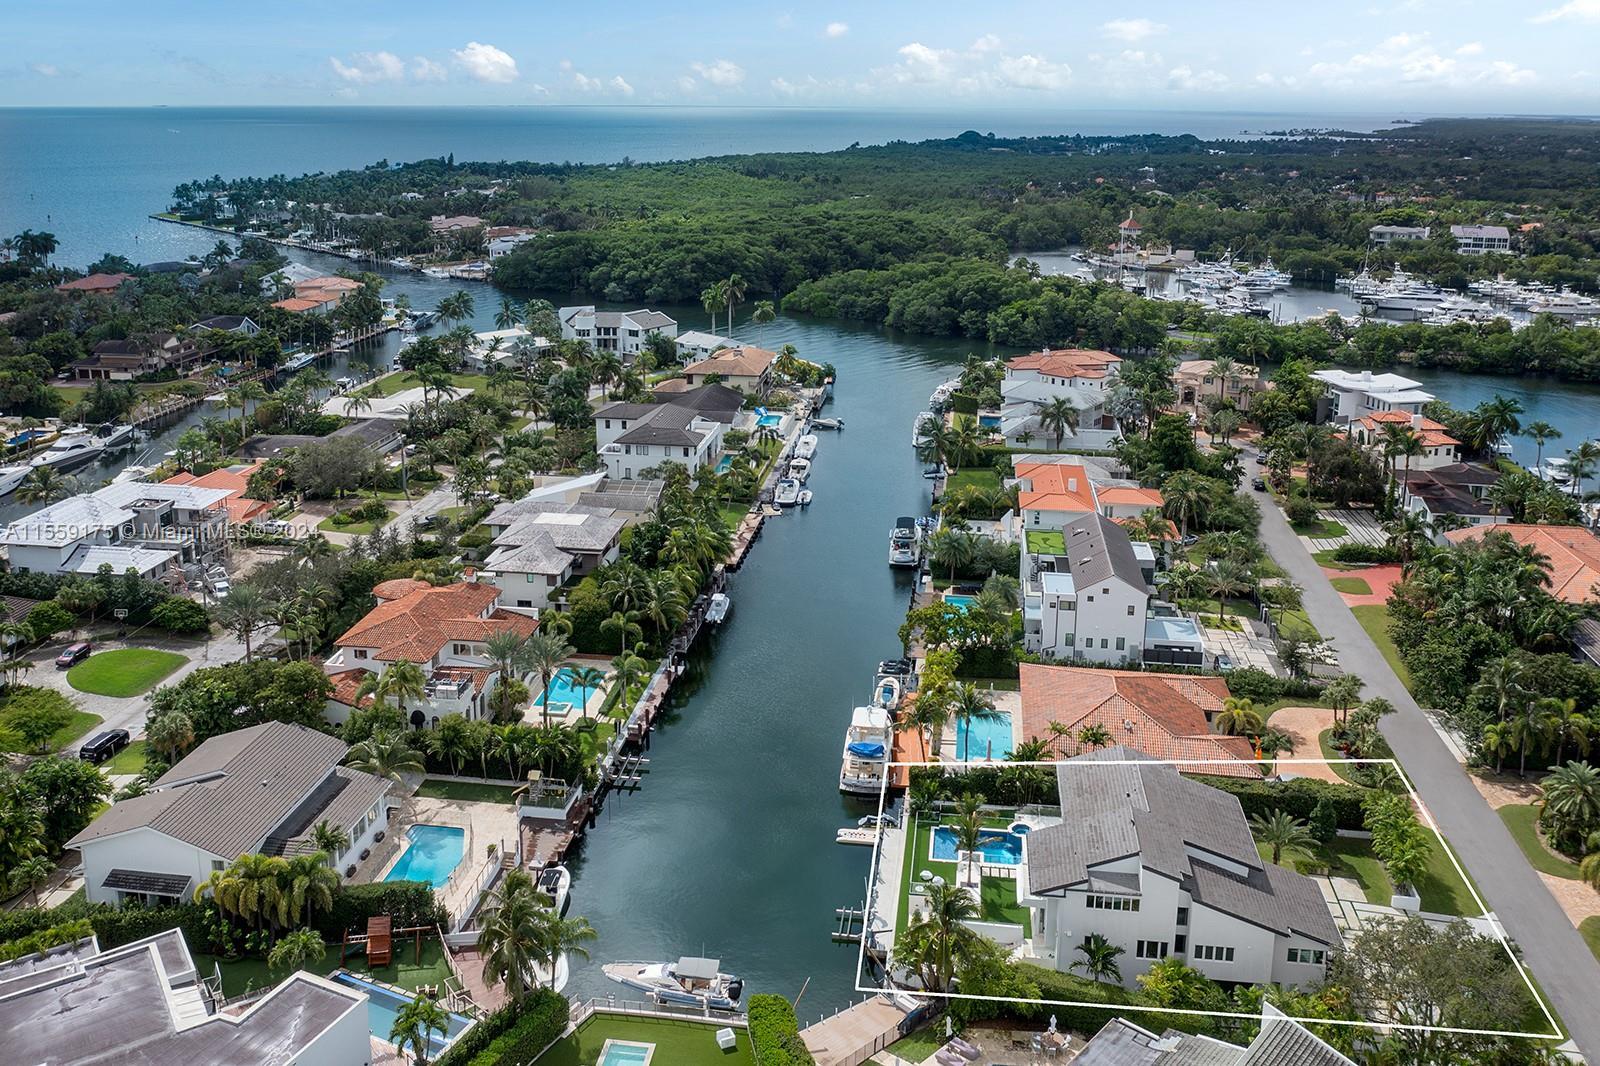 Nestled within the prestigious gated community of Sunrise Harbor in Coral Gables, this luxurious wat